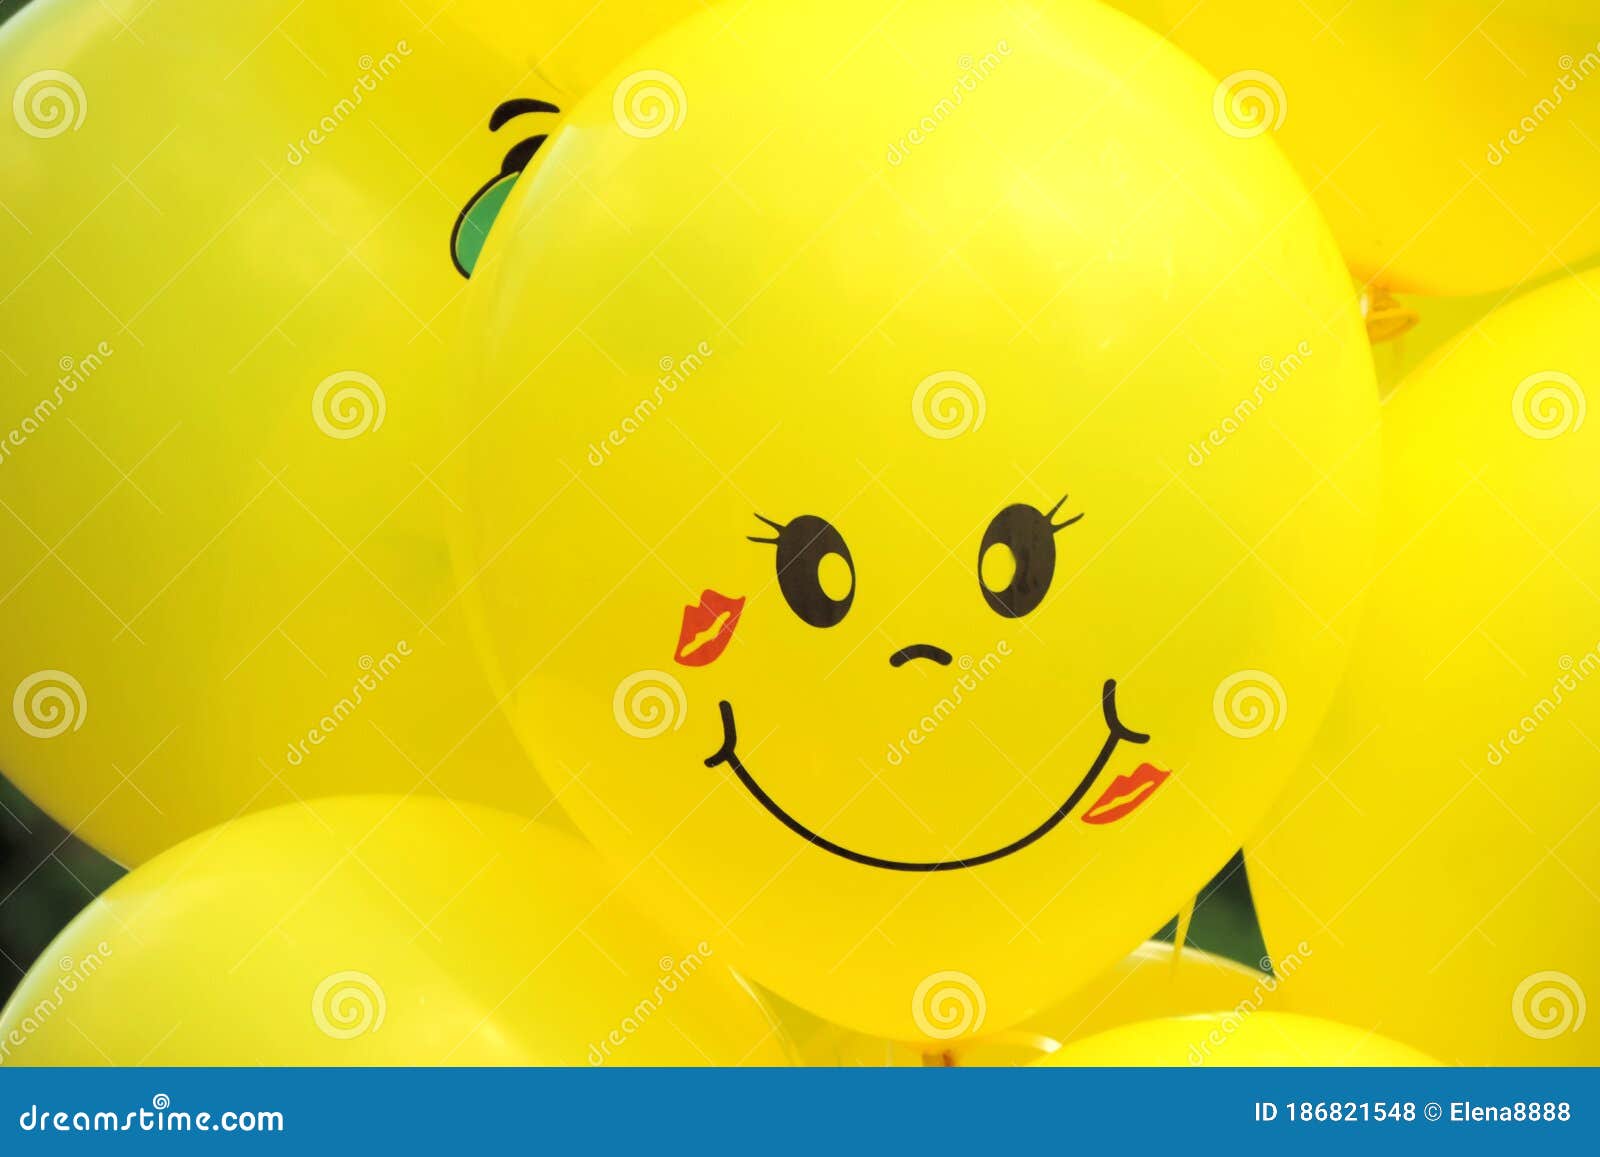 Yellow Balloon with a Smiling Face Stock Photo - Image of kitchen ...